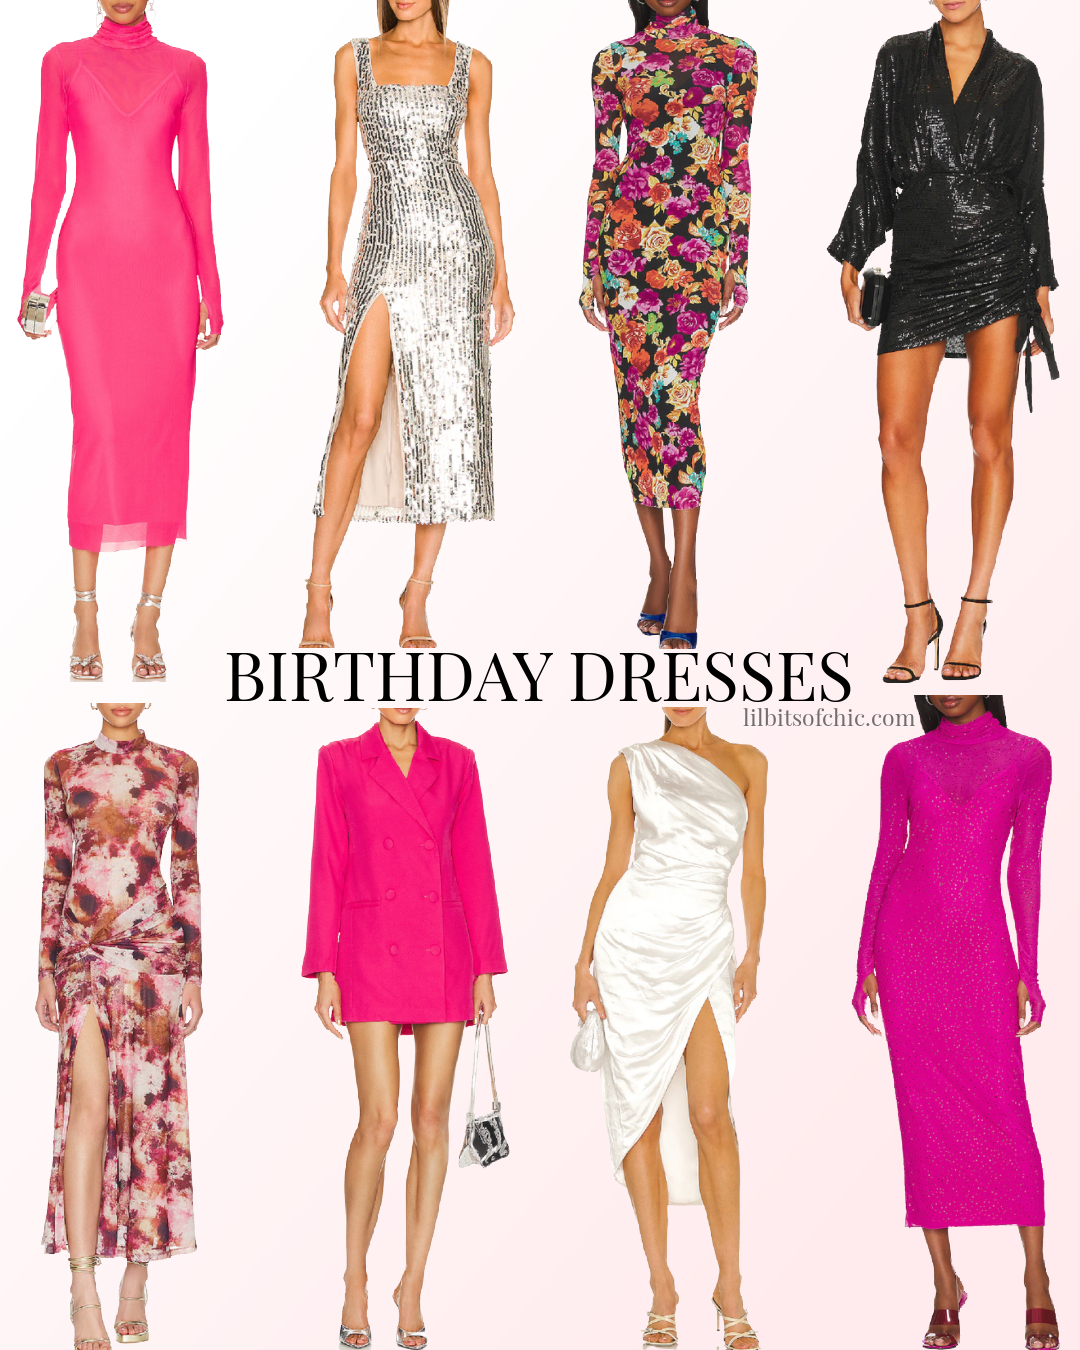 Birthday Dress ideas, what to wear to your birthday party, what to wear to your birthday dinner